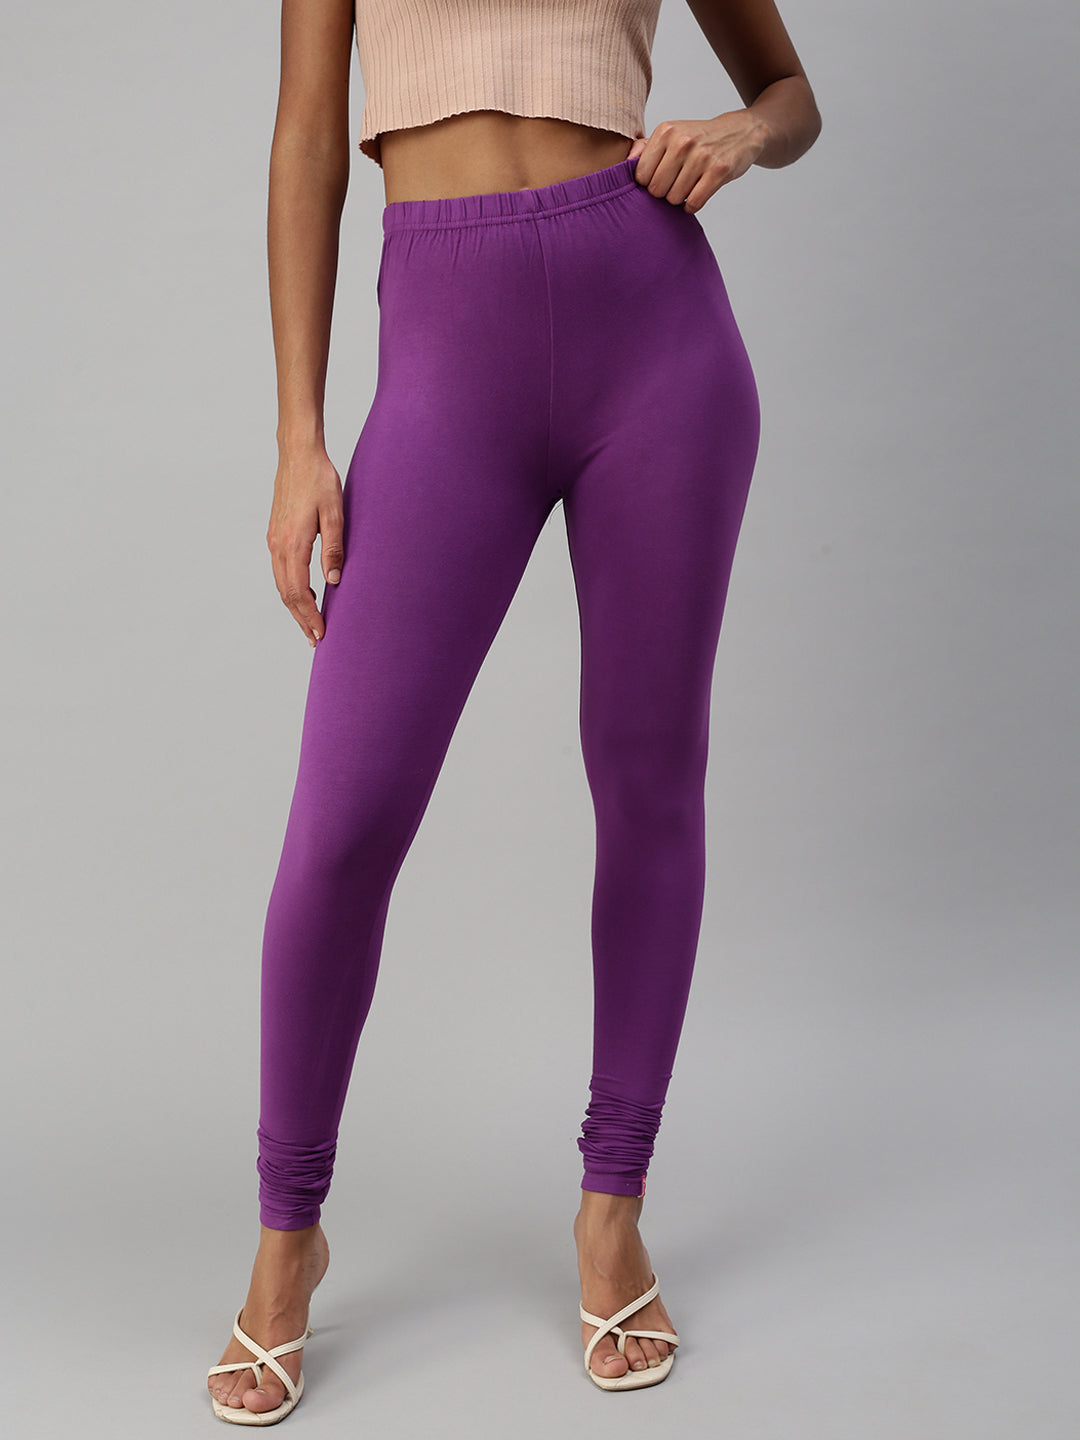 Wednesday (Exclusive) - High-quality Handcrafted Vibrant Leggings